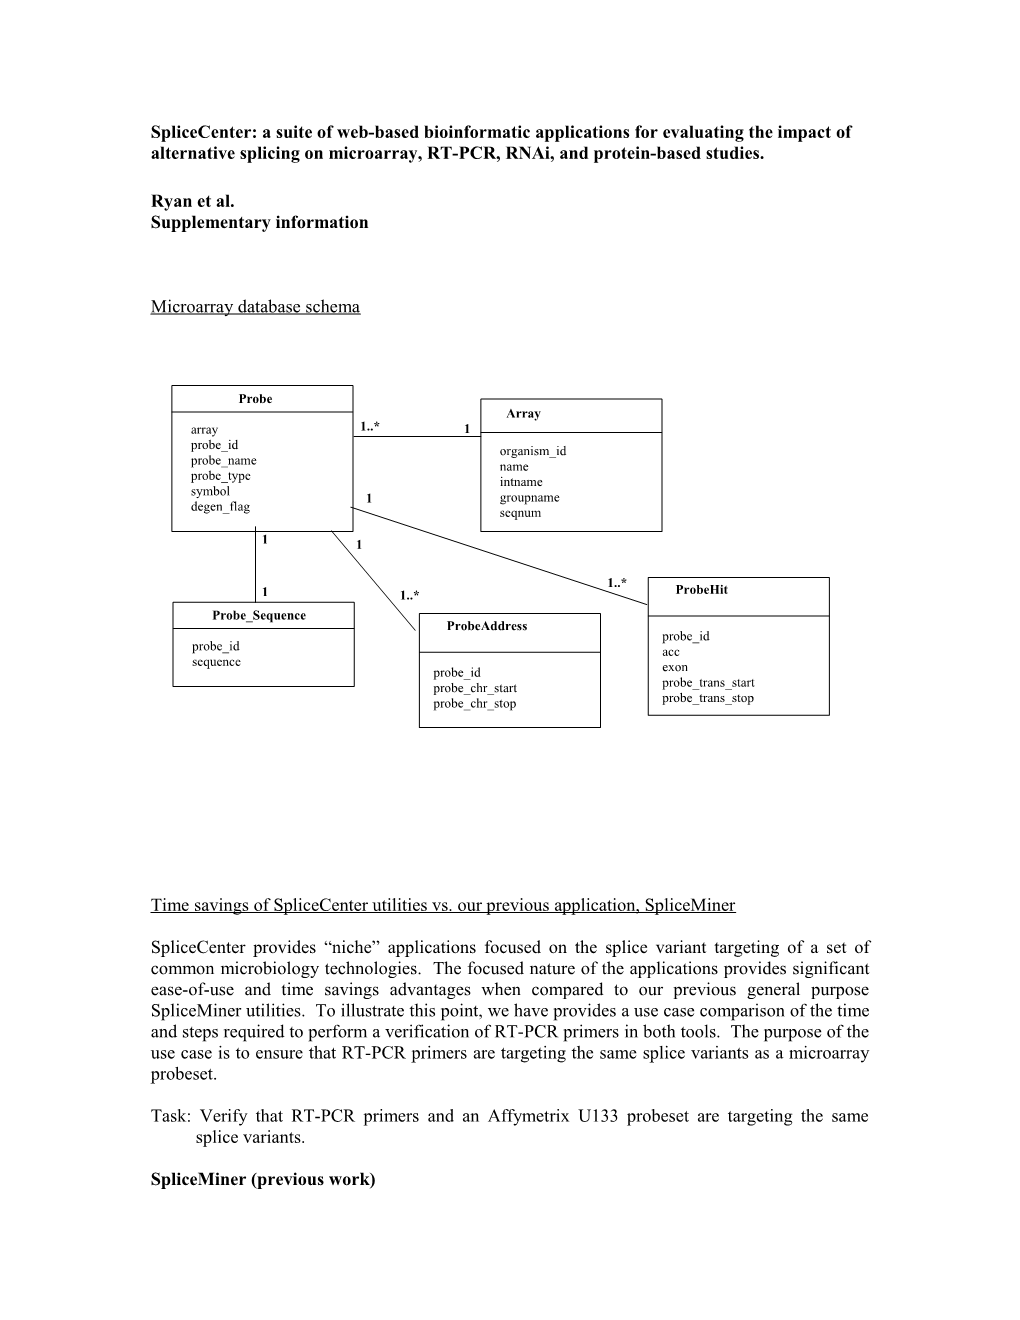 Splicecenter: a Suite of Web-Based Bioinformatic Applications for Evaluating the Impact